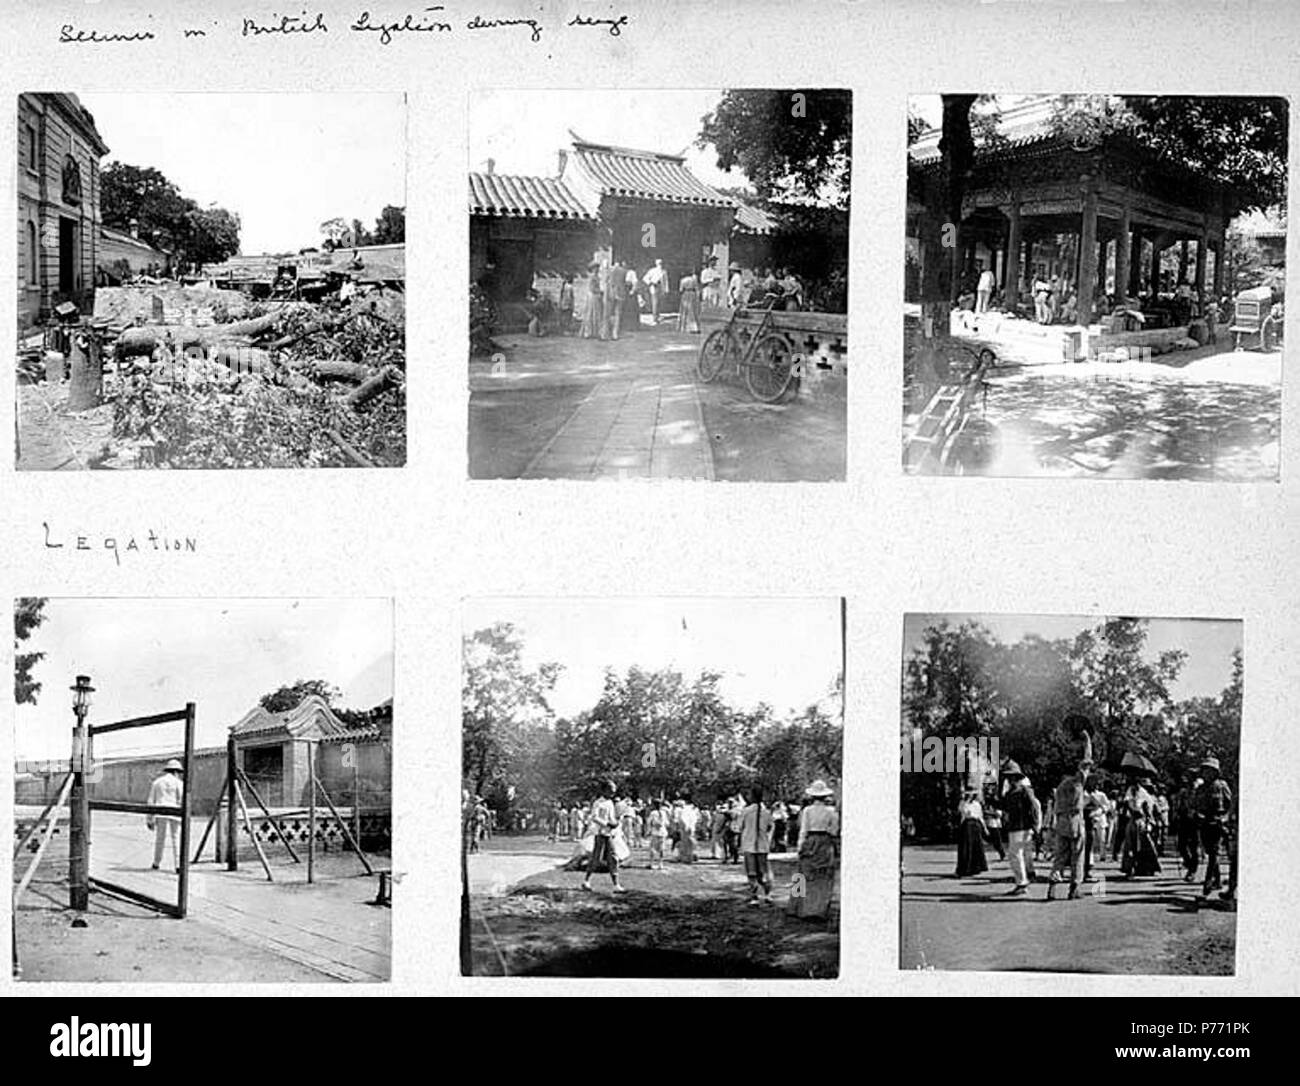 . English: 7.11 British Legation during the siege of Tientsin, 1900 . English: Captions on album page: Scenes in British legation during seige; Legation . PH Coll 241.B11a-f Subjects (LCTGM): Embassies--British--China--Beijing Subjects (LCSH): Beijing (China)--History--Siege, 1900; China--History--Boxer Rebellion, 1899-1901; Great Britain. Legation (China)--Siege, 1900; British--China--Beijing; Beijing (China)--Buildings, structures, etc.  . 1900 1 711 British Legation during the siege of Tientsin, 1900 (CHANDLESS 42) Stock Photo